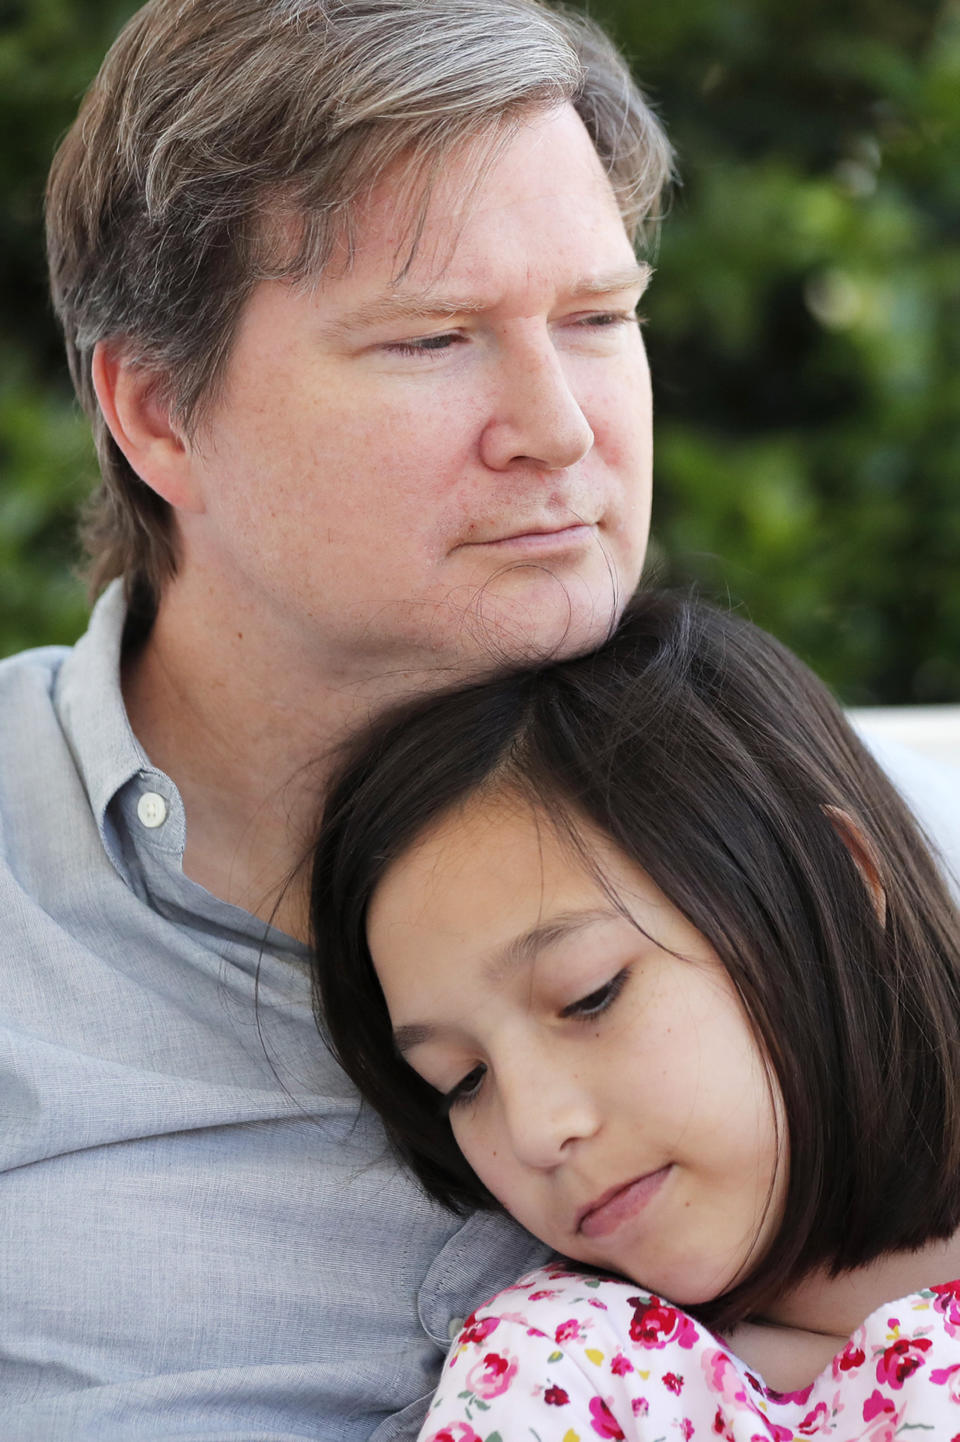 Juliet Daly, 12, sits with her father Sean Daly on the front porch of their family home in Covington, La., Thursday, April 30, 2020. A team of pediatric cardiology specialists found that Juliet had acute fulminant myocarditis (AFM), an uncommon heart condition that tends to present with sudden onset acute heart failure, cardiogenic shock or life-threatening arrhythmias. A nasal swab confirmed that Juliet was also COVID-19 positive and that she had a second viral infection – adenovirus. (AP Photo/Gerald Herbert)